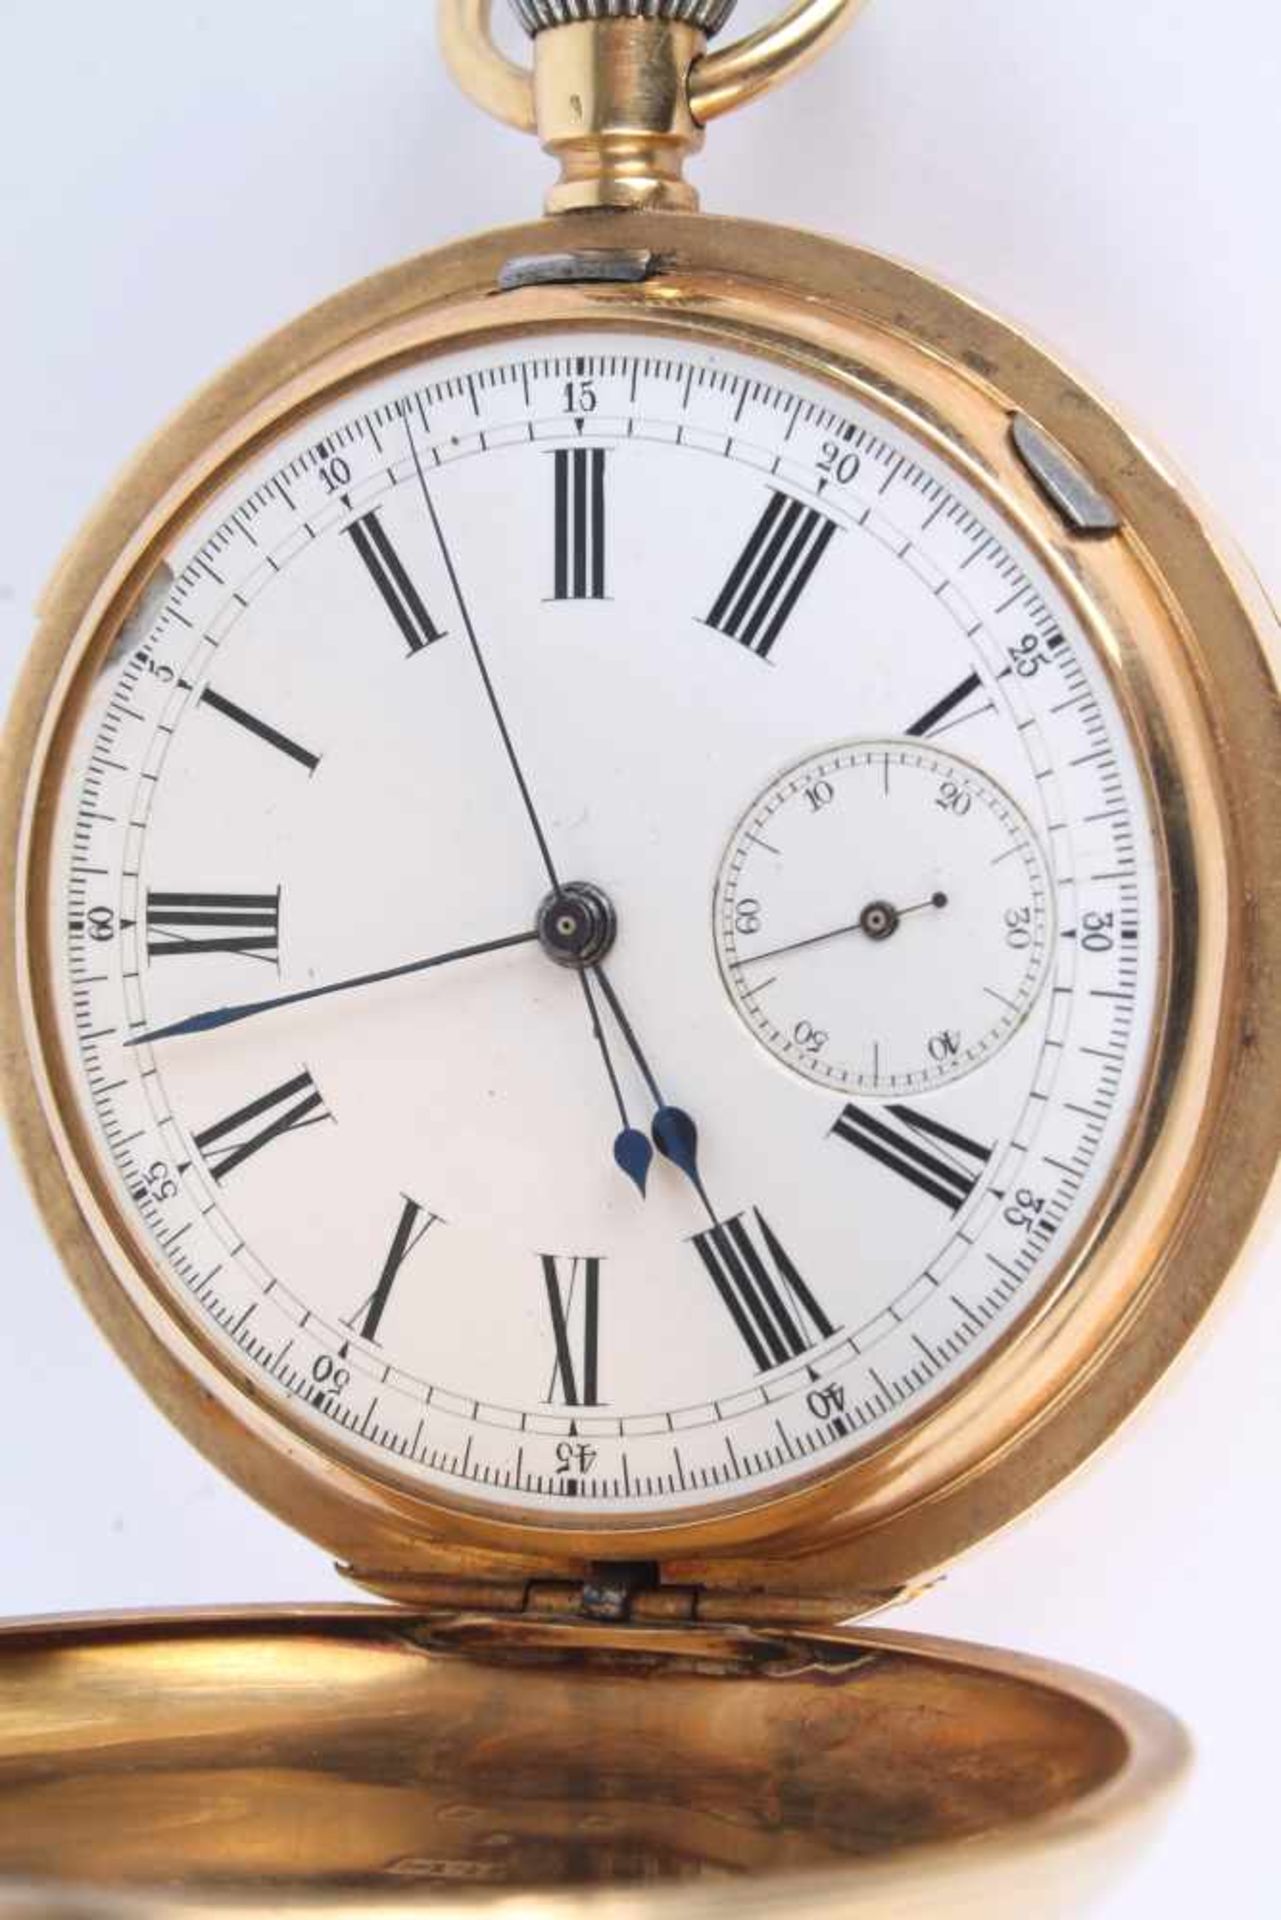 750 Gold Savonette mit Repetition und Stoppuhr, 18K gold savonette with repeater and stopwatch, - Image 3 of 7